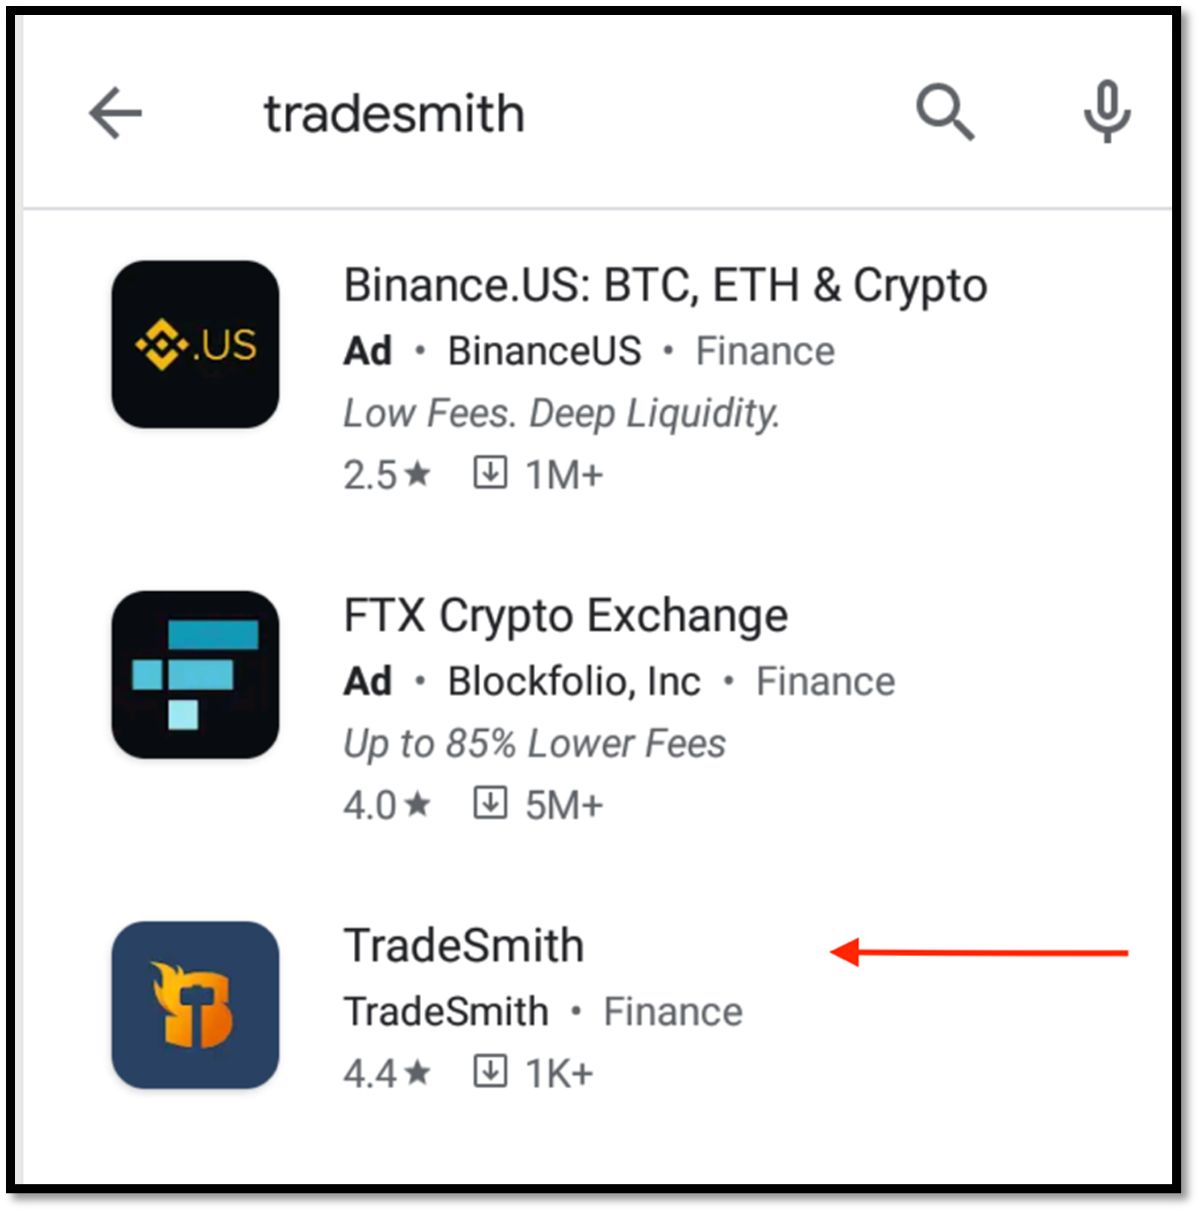 TradeSmith_Mobile_App_Guide___Android_Users_2.png